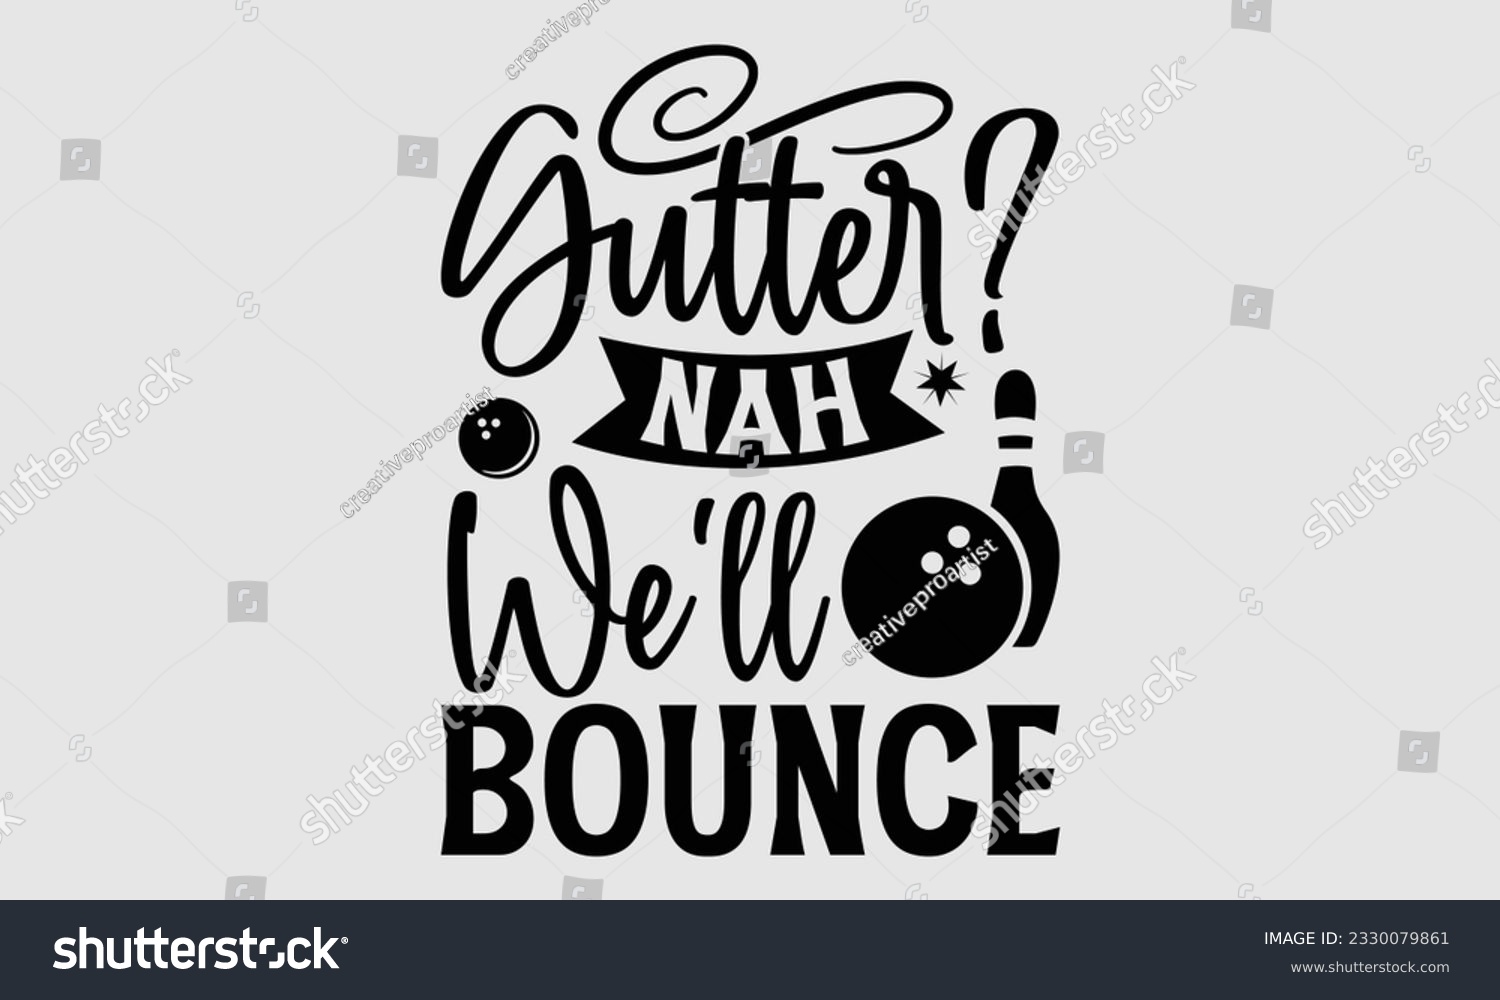 SVG of Gutter Nah We'll Bounce- Bowling t-shirt design, Handmade calligraphy vector Illustration for prints on SVG and bags, posters, greeting card template EPS svg